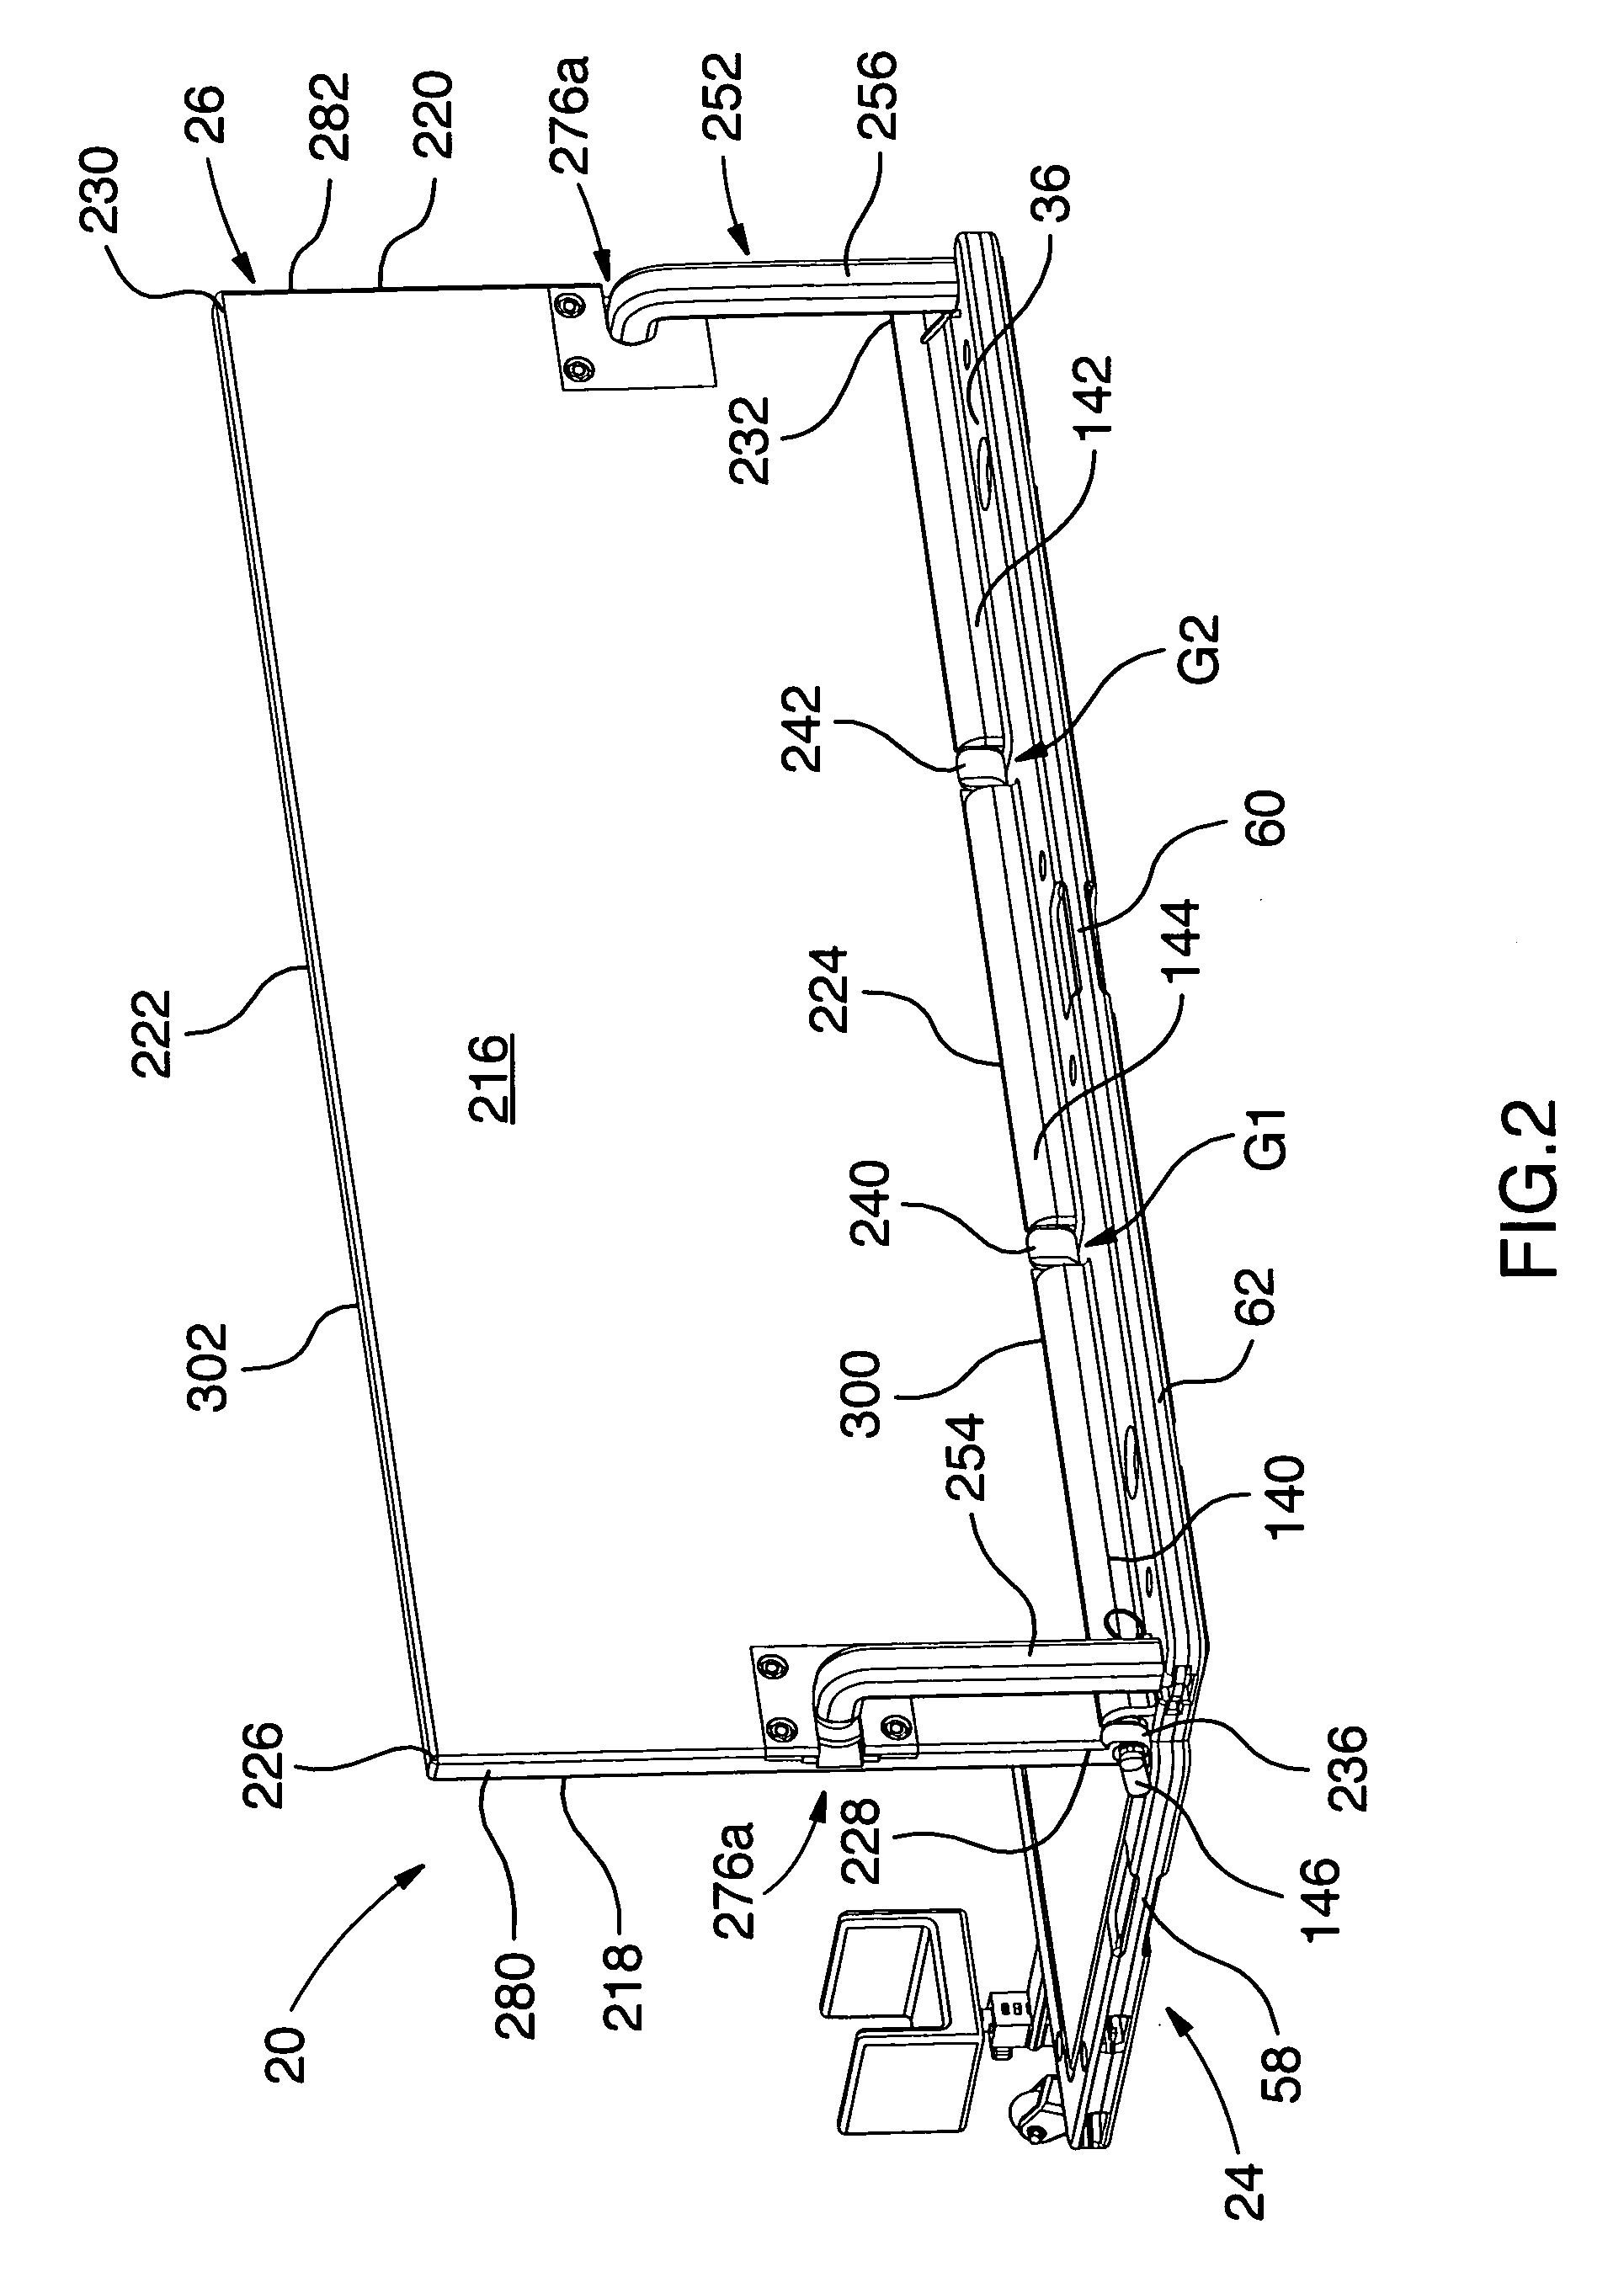 Isometric exercise apparatus and storage rack therefor